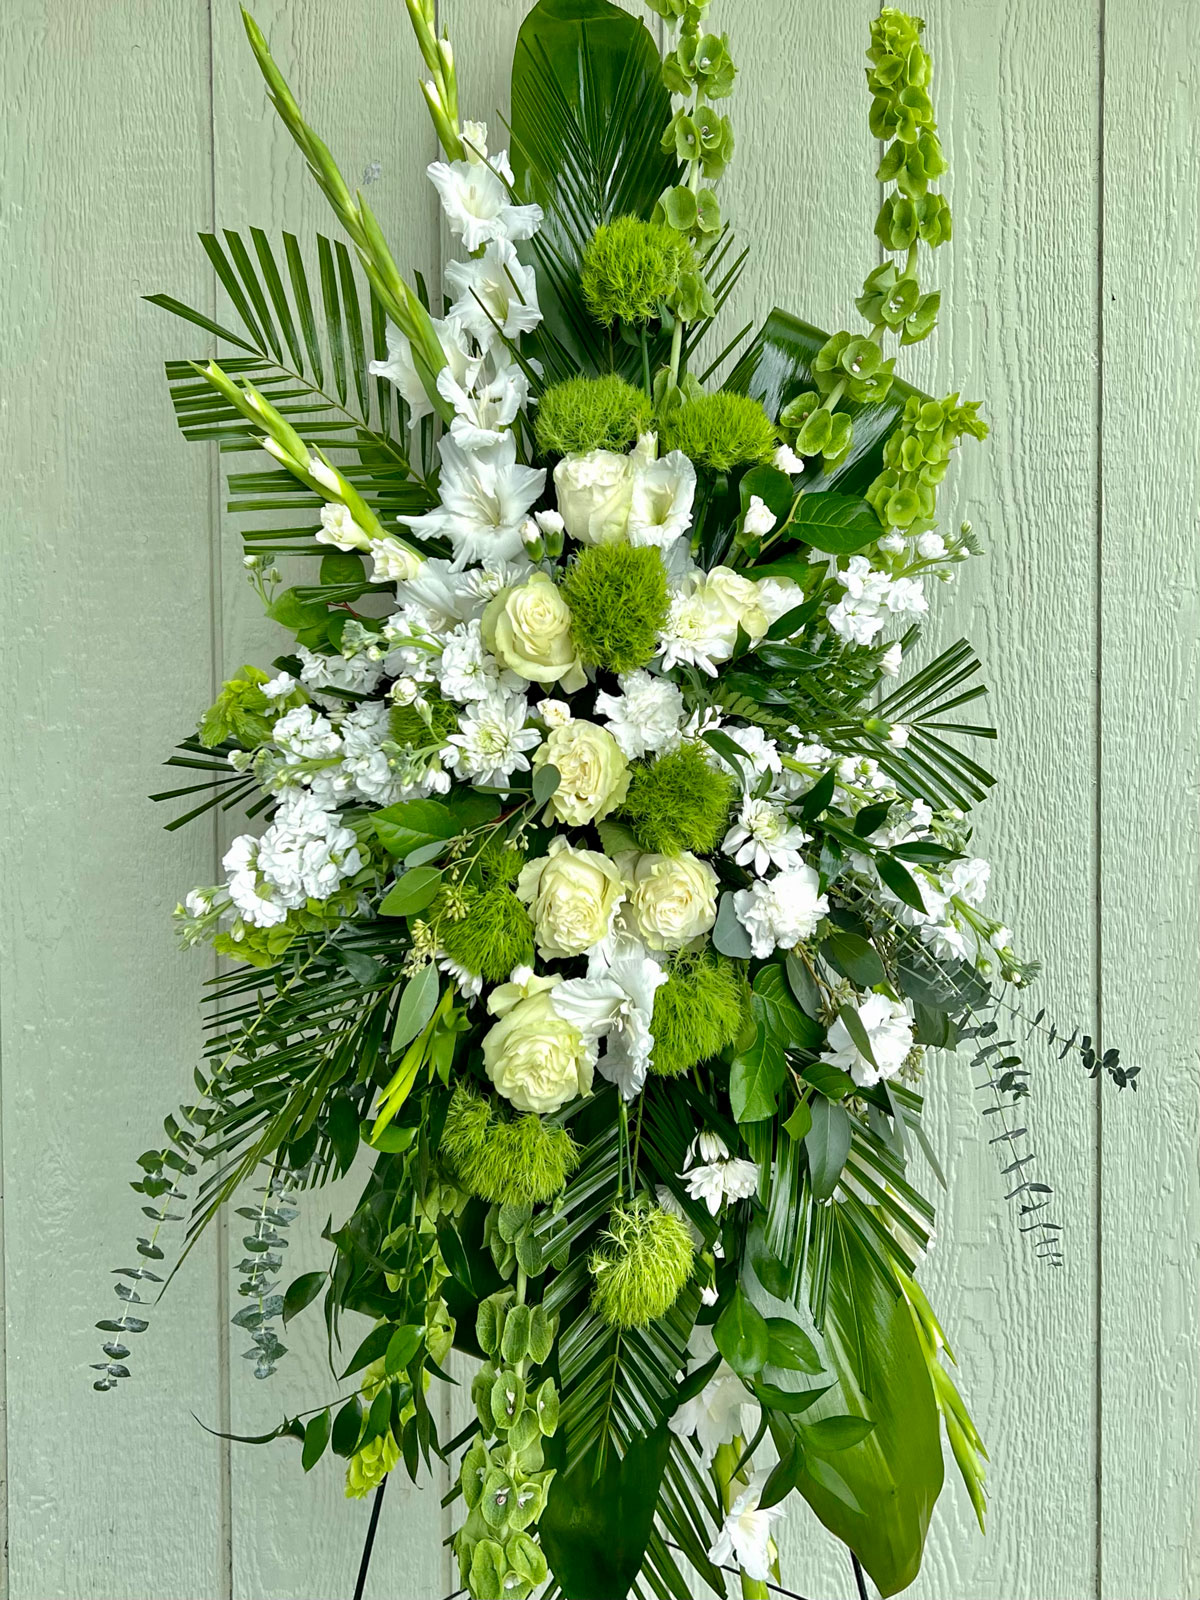 Condolence Spray from Annaville Florist in Calallen, Corpus Christi, Texas located near Sawyer George Funeral Home - Green and White